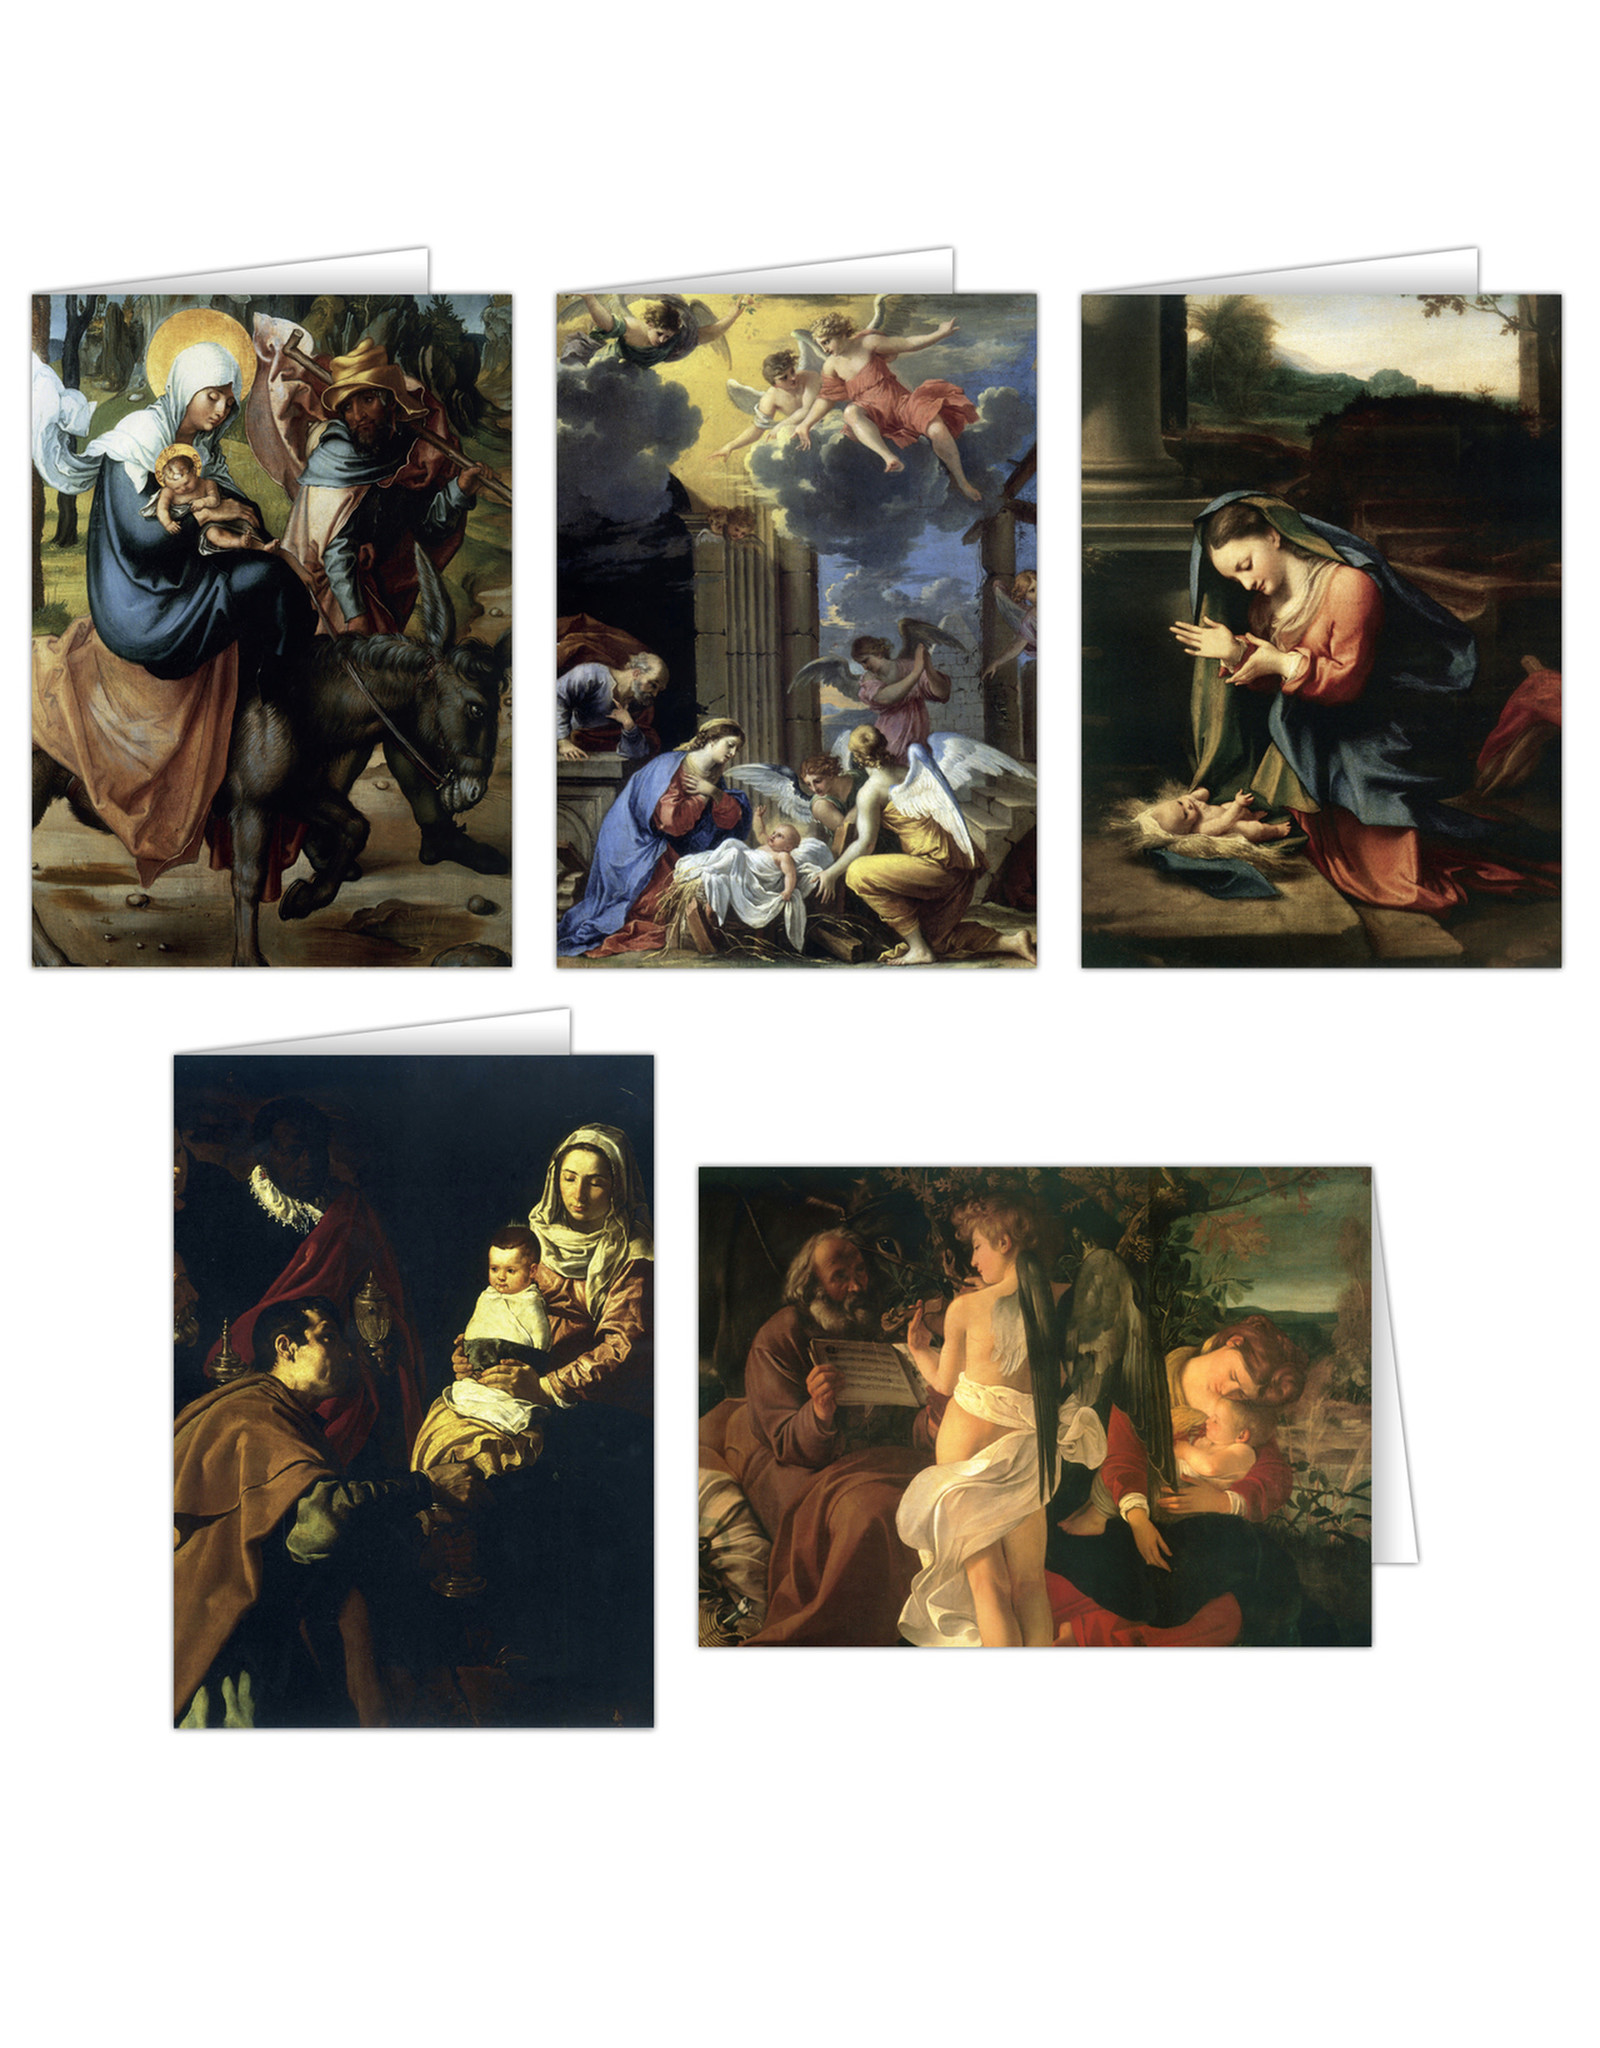 Nelson Art Boxed Set of 25 Christmas Cards - Nativity Scenes